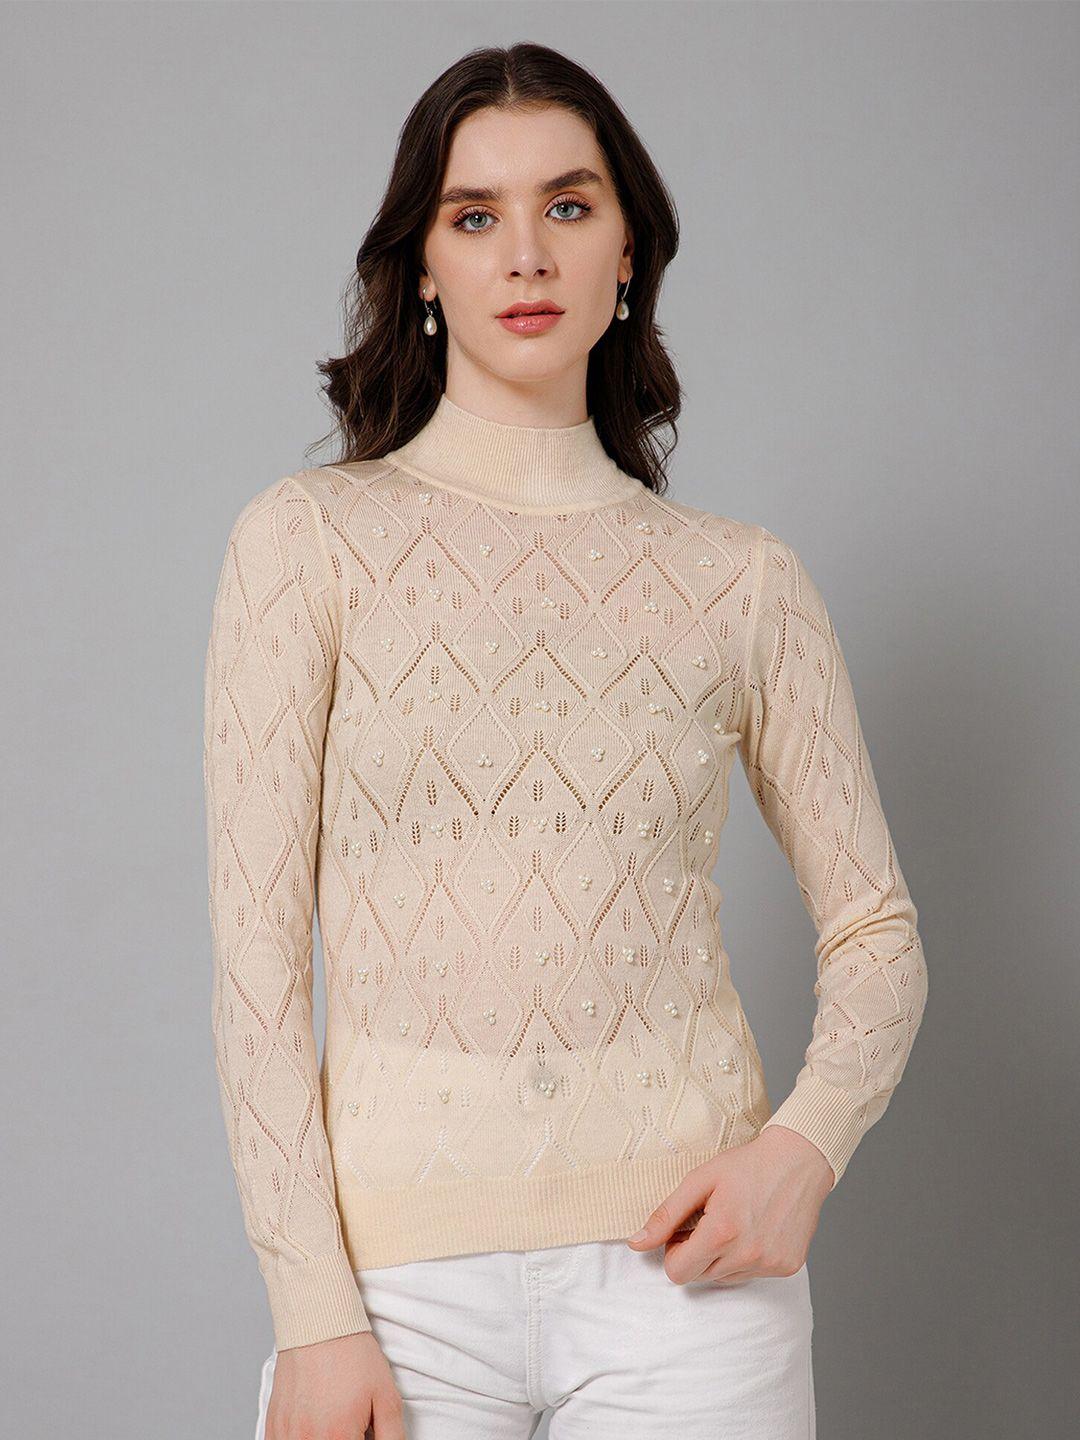 cantabil open knit self design high neck embellished detailed acrylic pullover